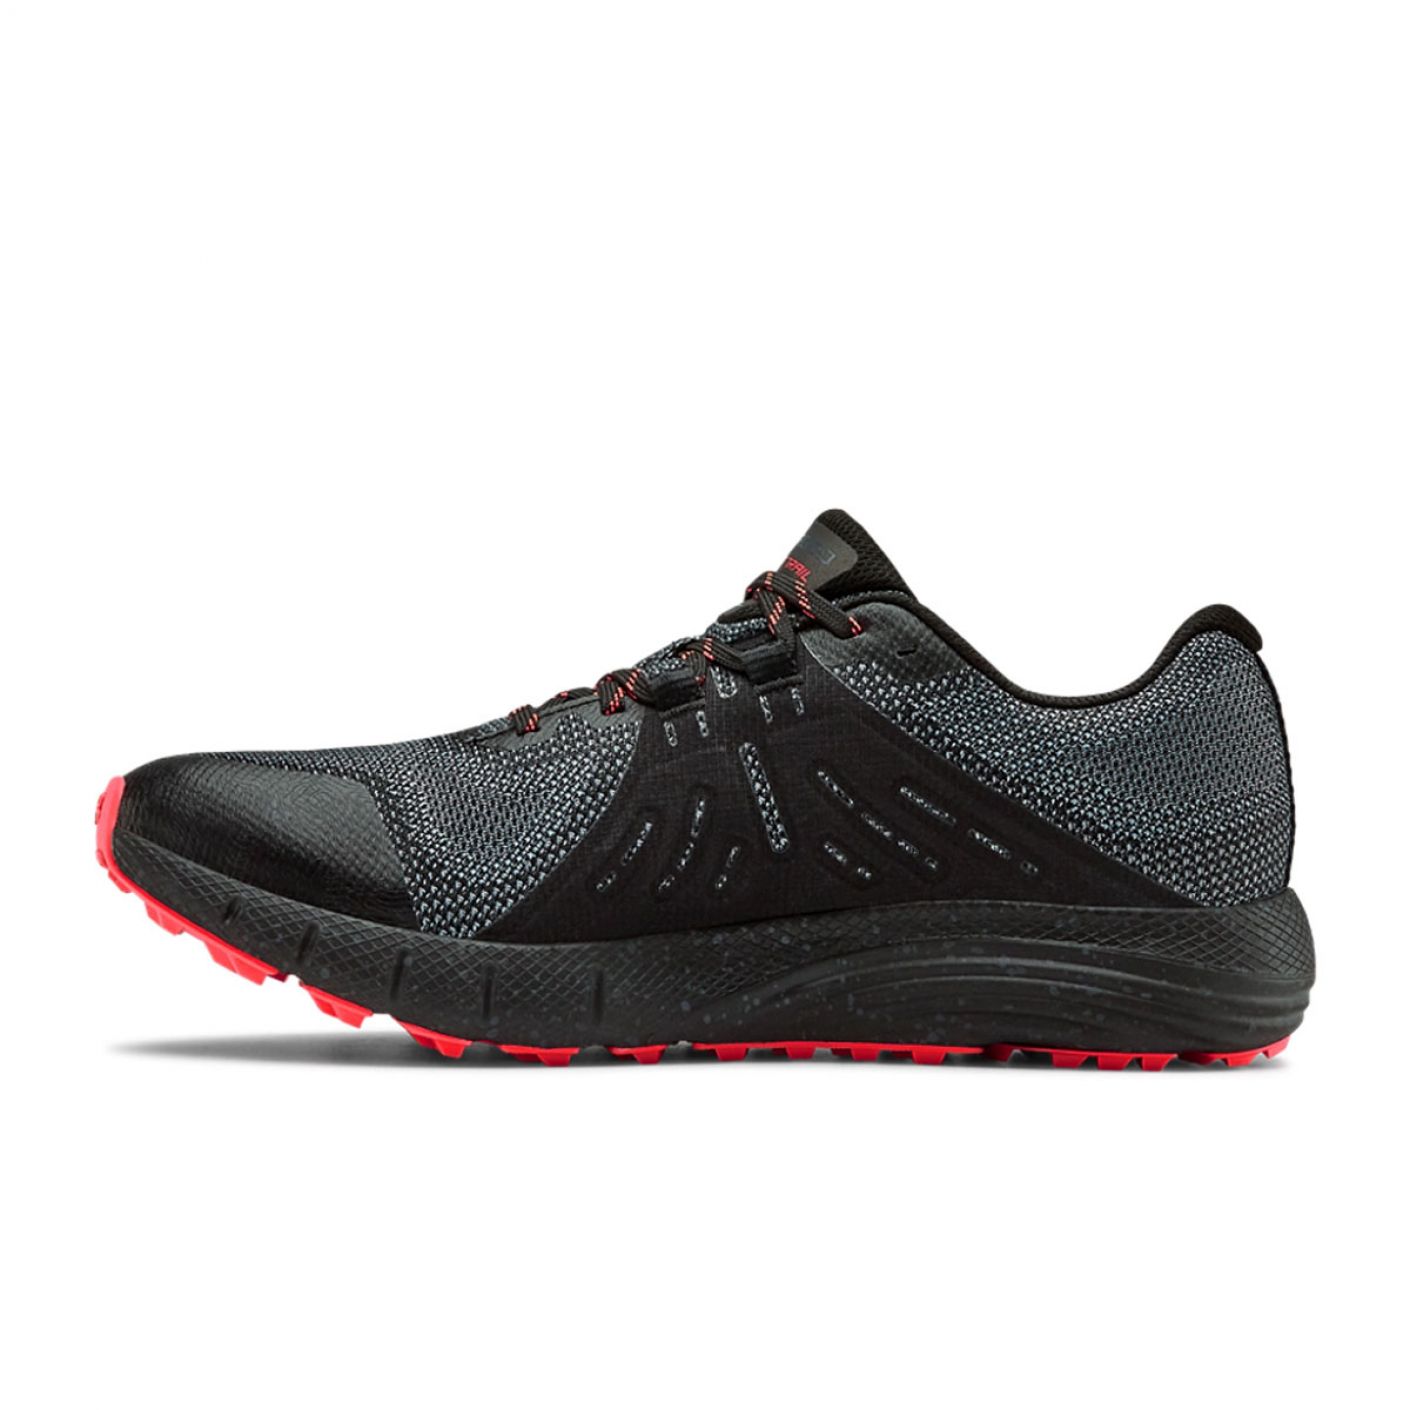 Under Armour Charged Bandit Trail Gtx Black